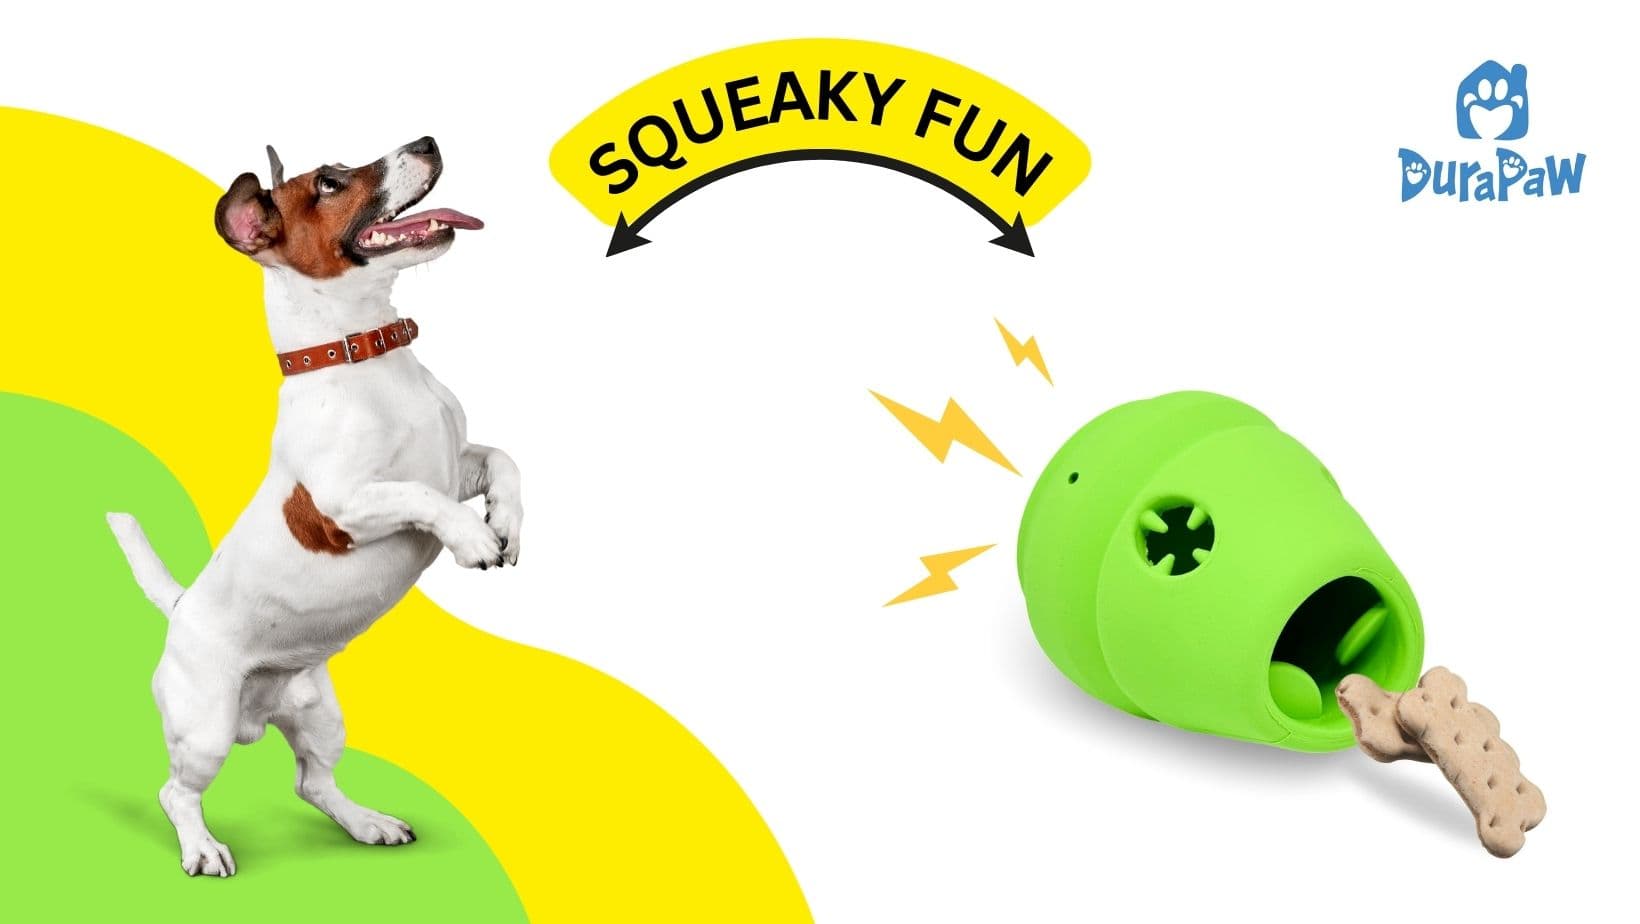 Squeaky Dog Enrichment Toppler